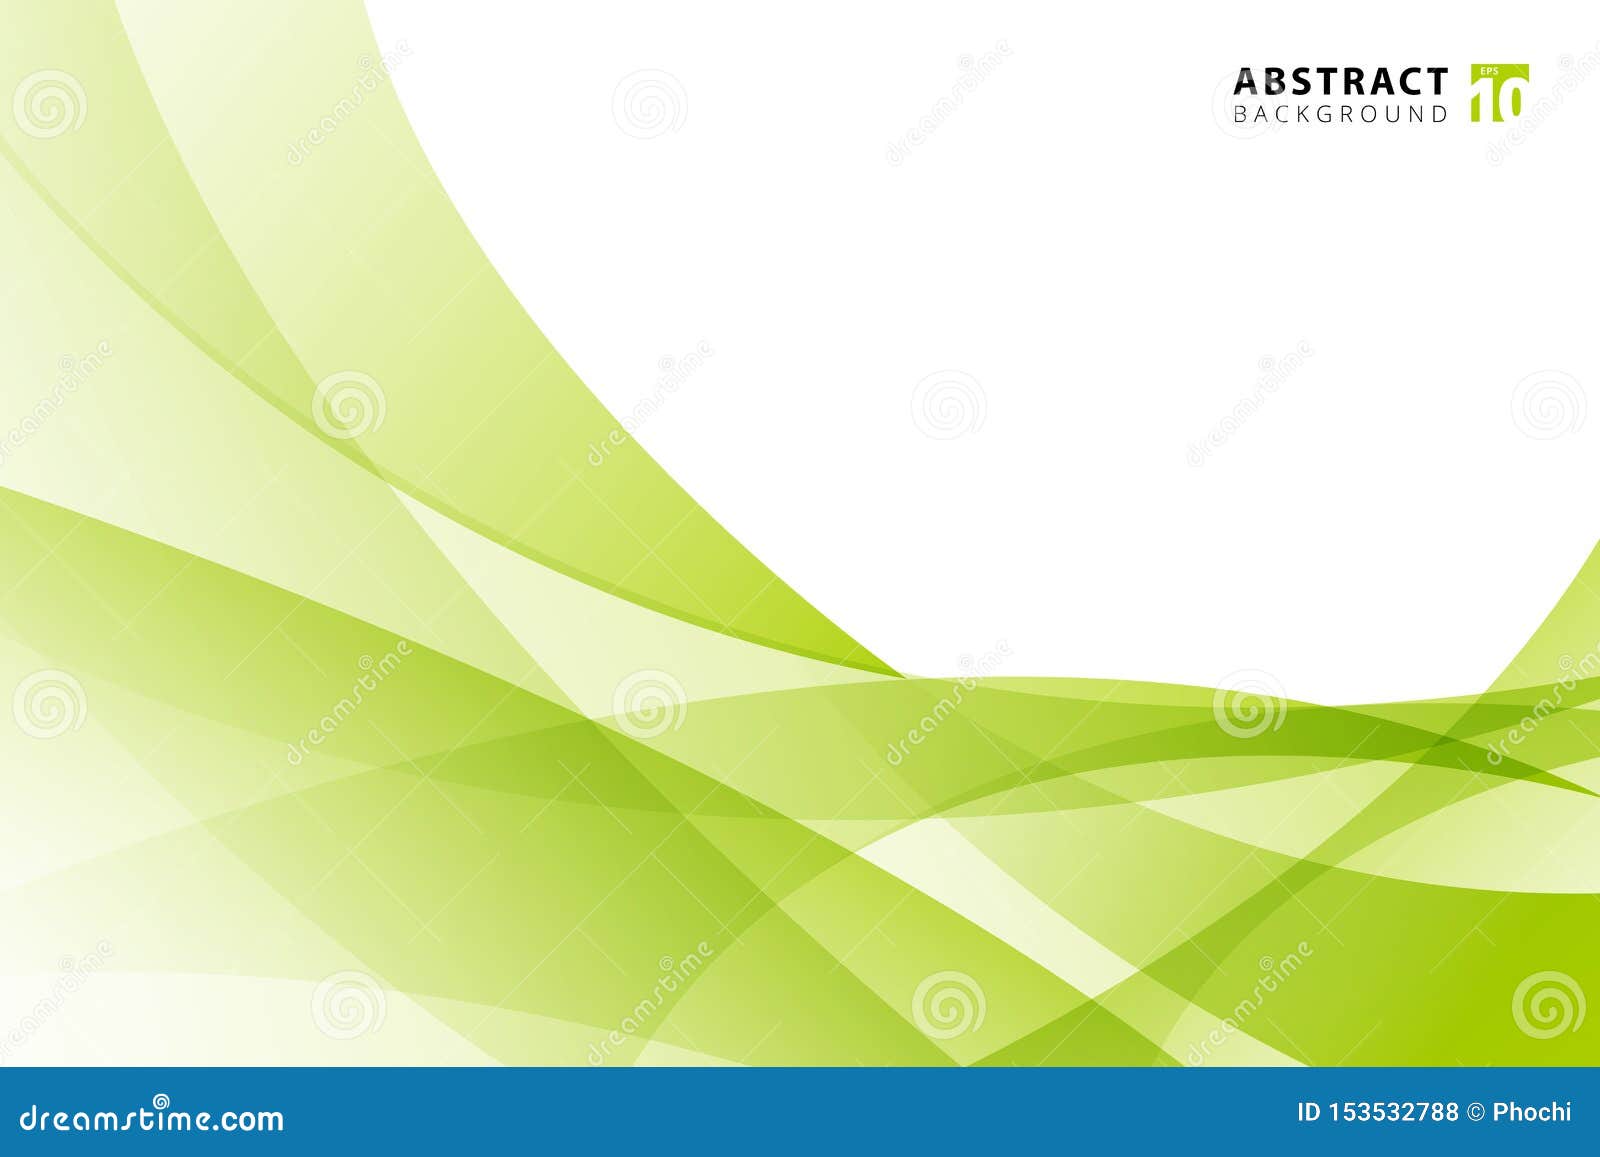 Abstract Modern Light Green Wave Element on White Background with Copy  Space Stock Vector - Illustration of brochure, presentation: 153532788